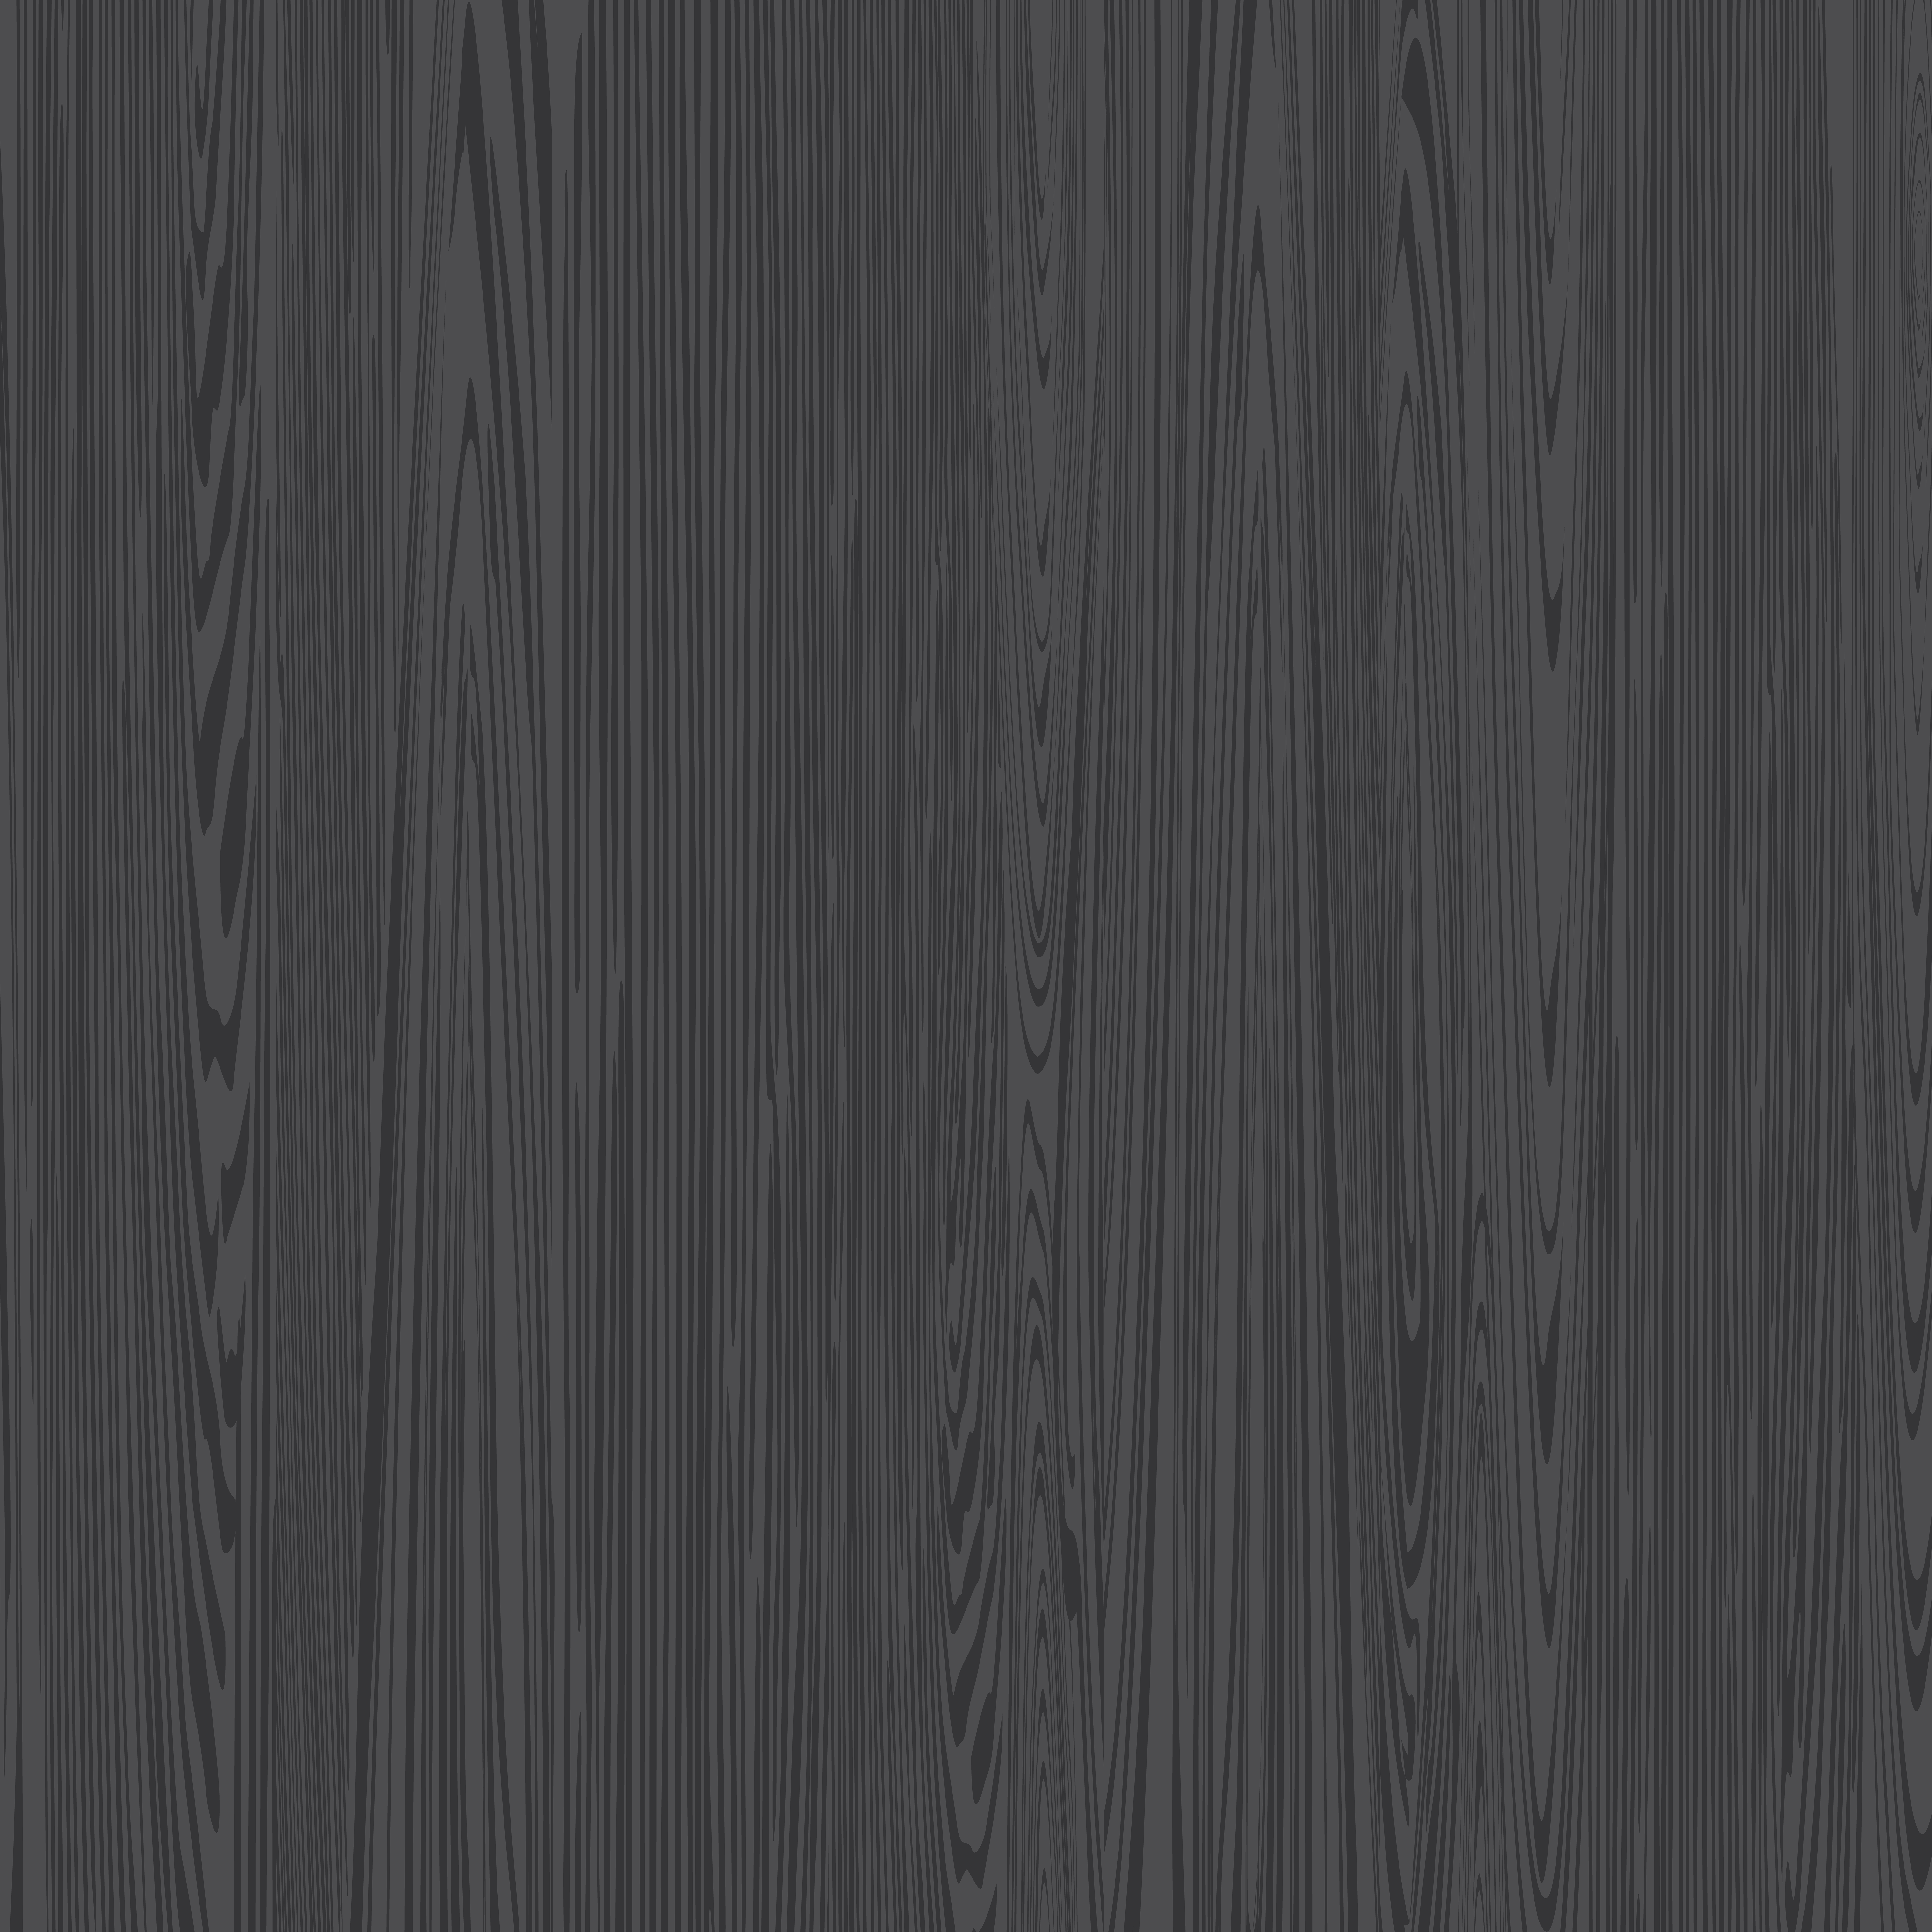 Grey Wood Background​-Quality Image and Transparent PNG Free Clipart